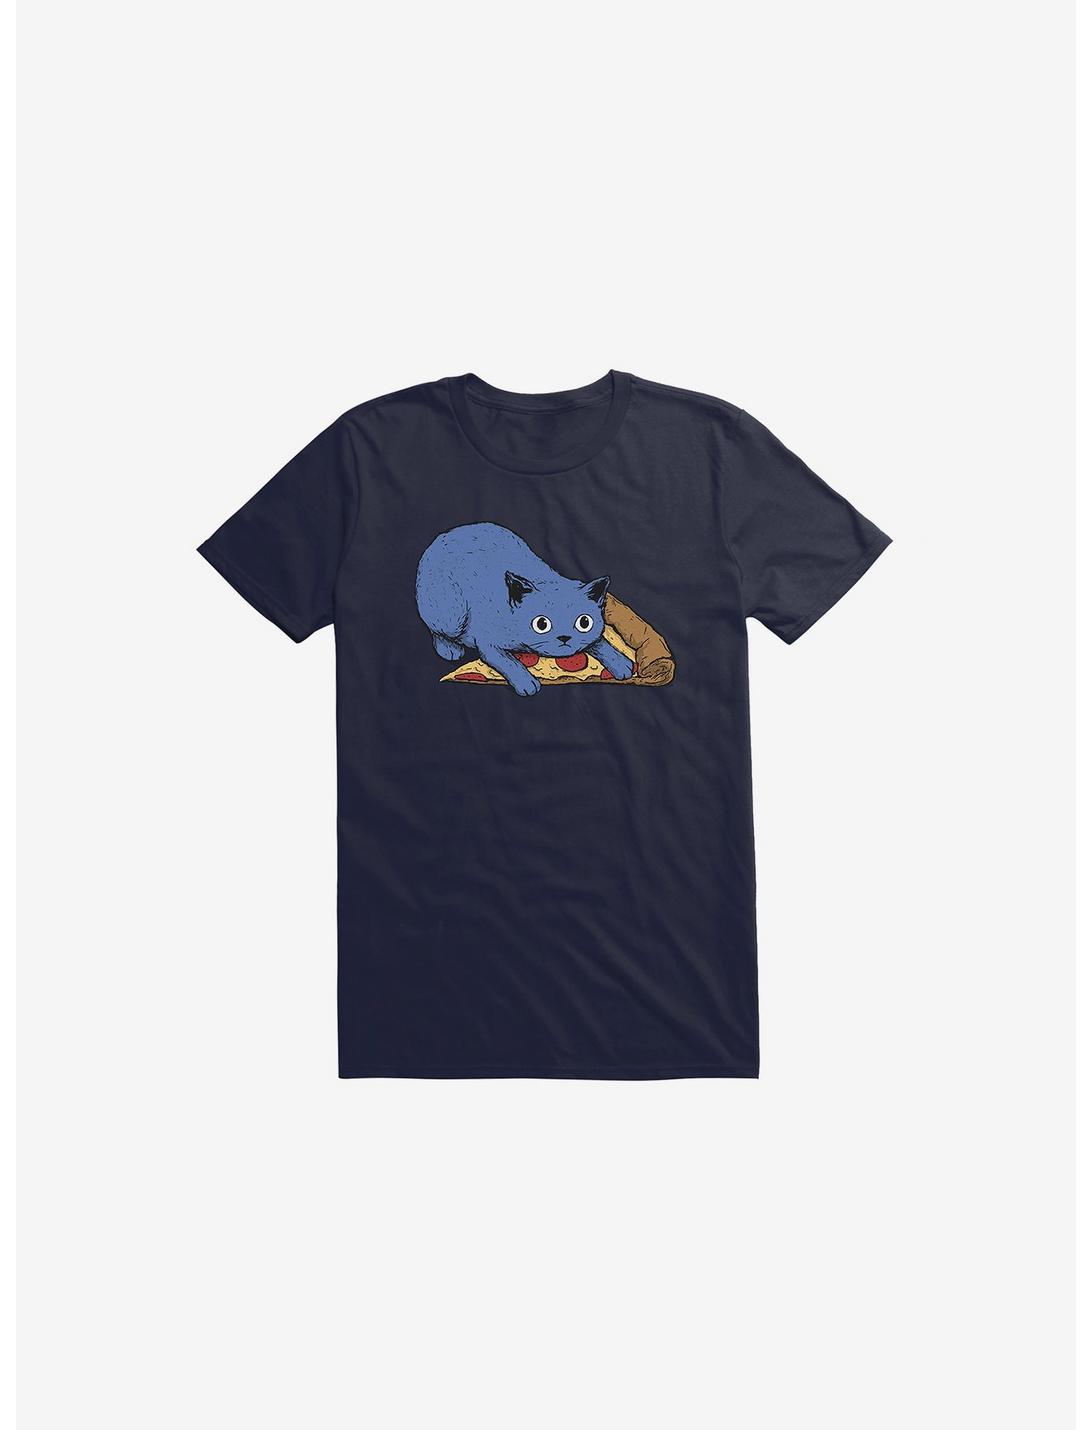 Get Your Own Pizza, Human! T-Shirt, NAVY, hi-res